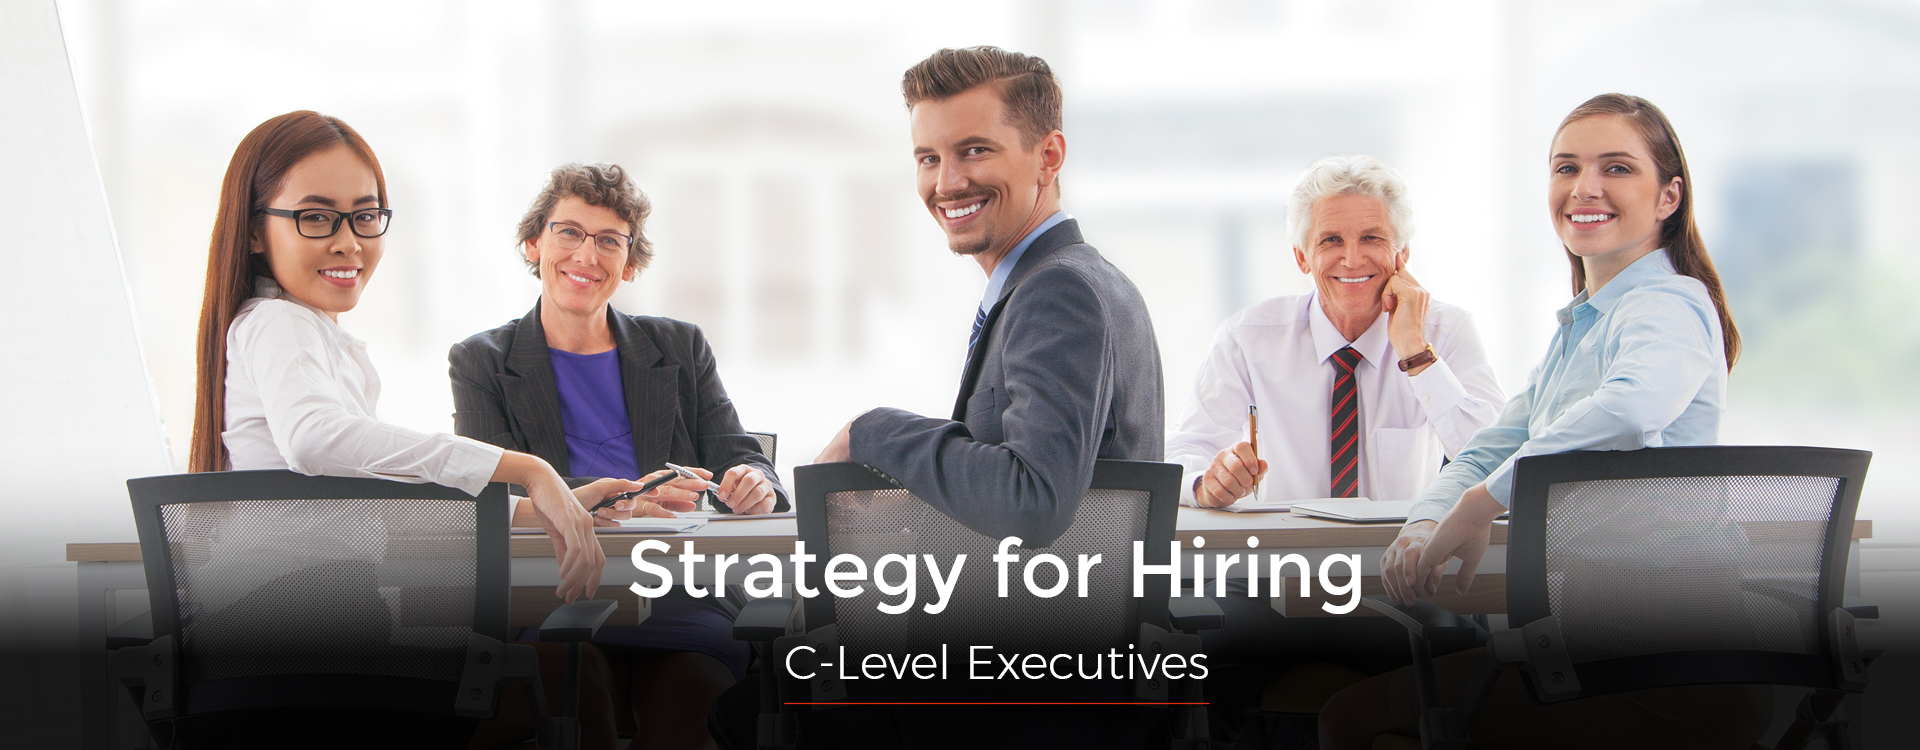 Strategy for Hiring C-Level Executives